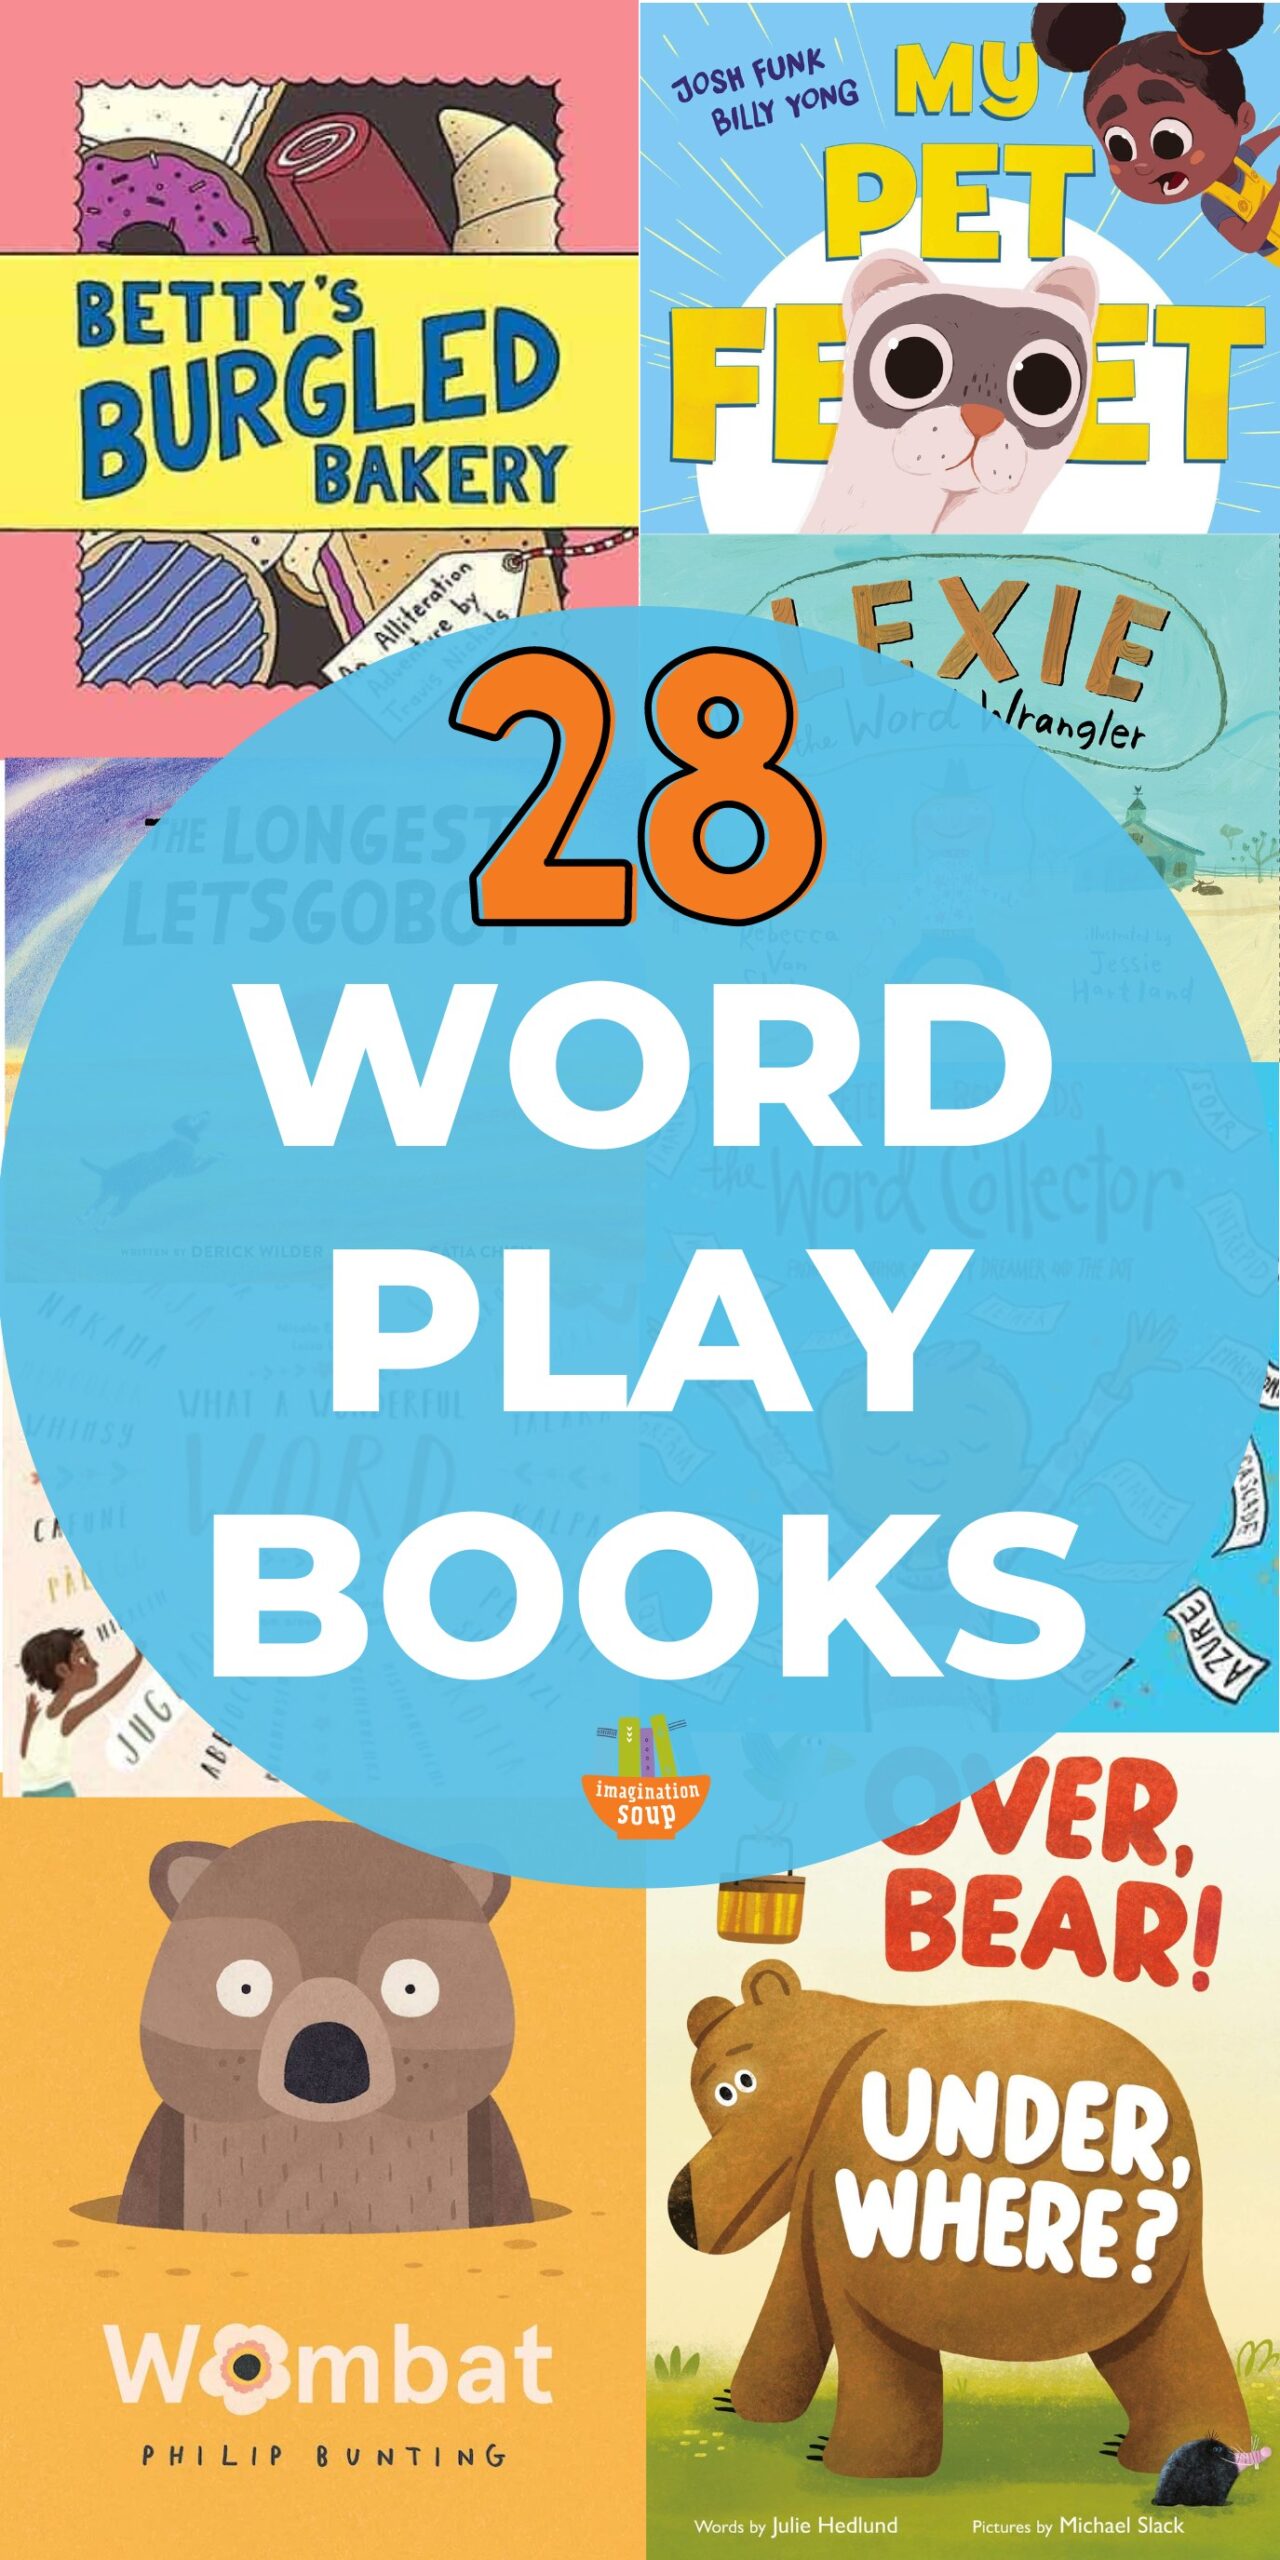 Wordplay makes kids love language; it inspires writing and helps kids learn new vocabulary.  Celebrate words and wordplay with playful picture books.